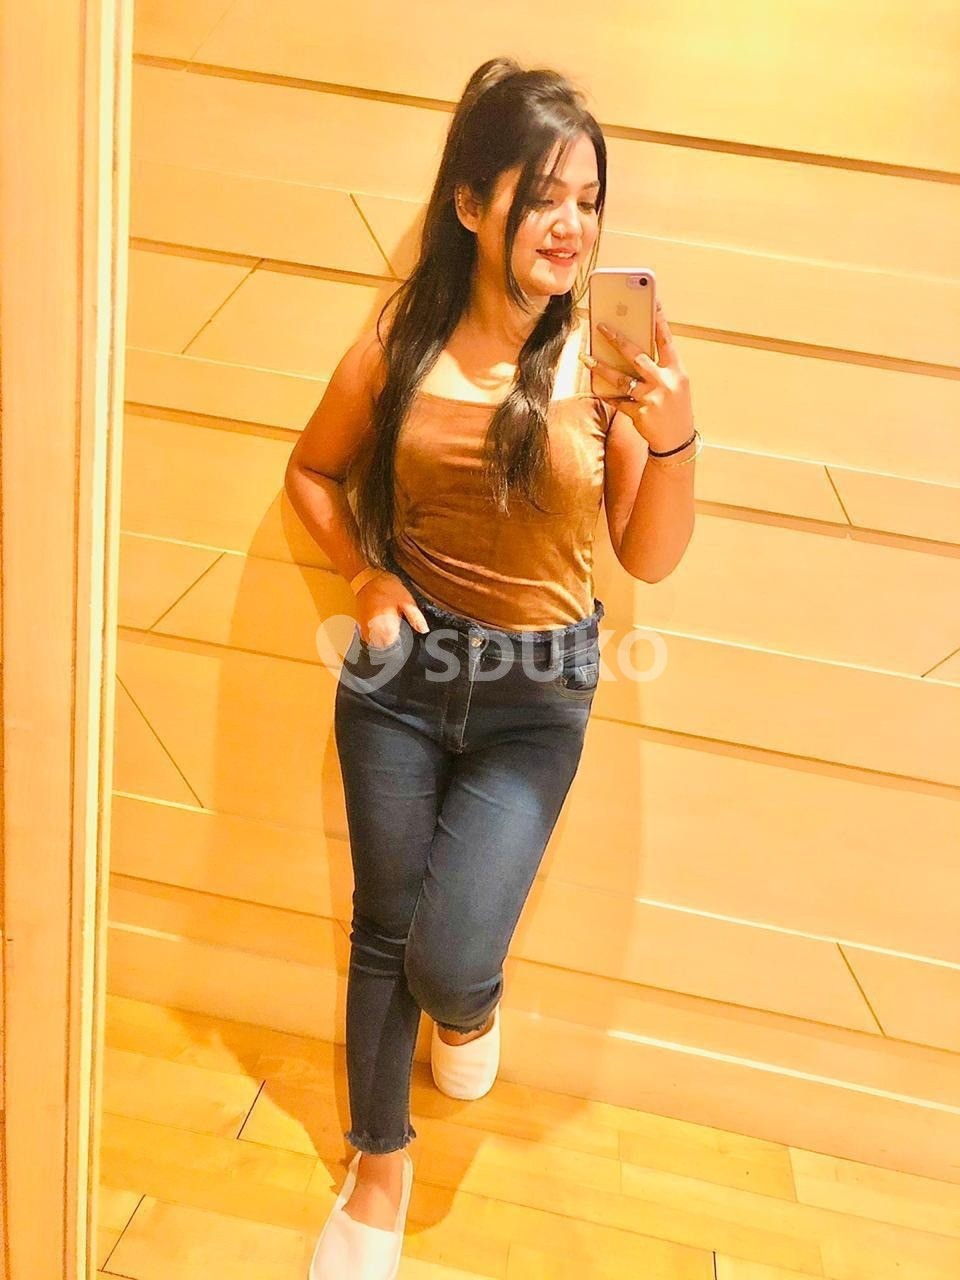 BEST SERVICE AVAILABLE IN TAMBARAM 100% SAFE AND SECURE TODAY LOW PRICE UNLIMITED ENJOY HOT COLLEGE GIRL HOUSEWIFE AUNTI